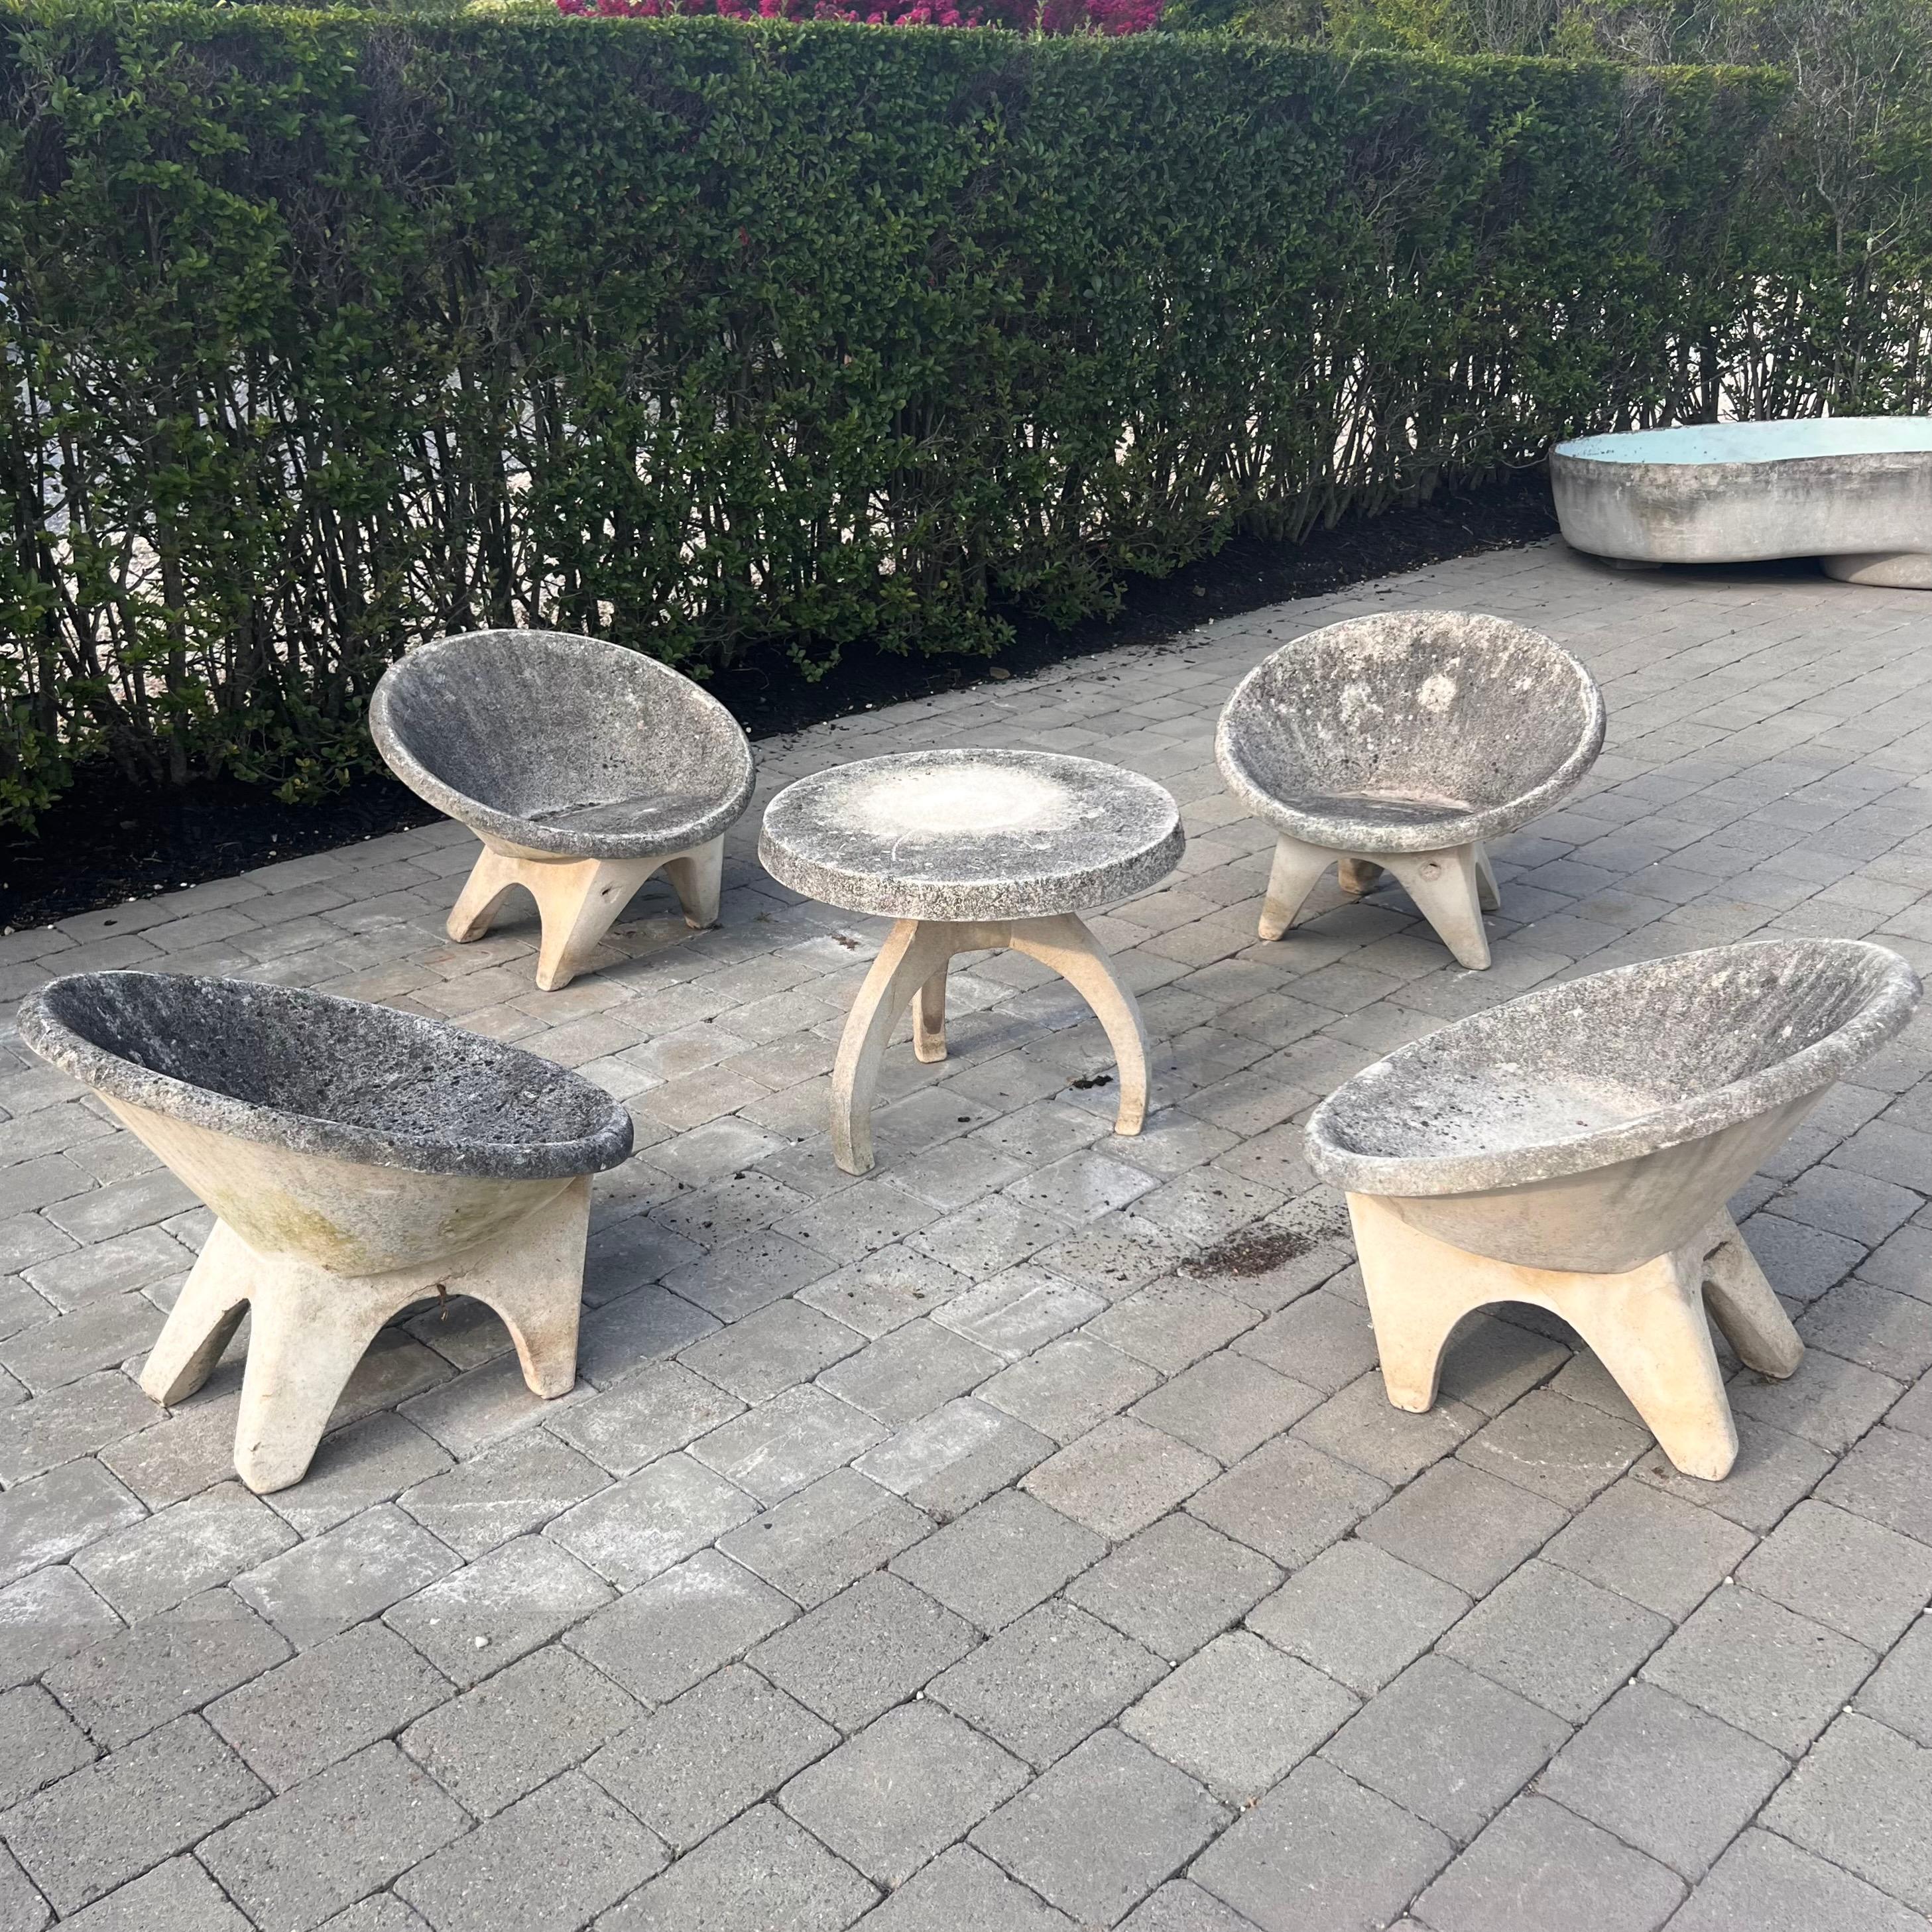 Cement Set of 4 Sculptural Concrete Chairs and Table, 1960s Belgium For Sale